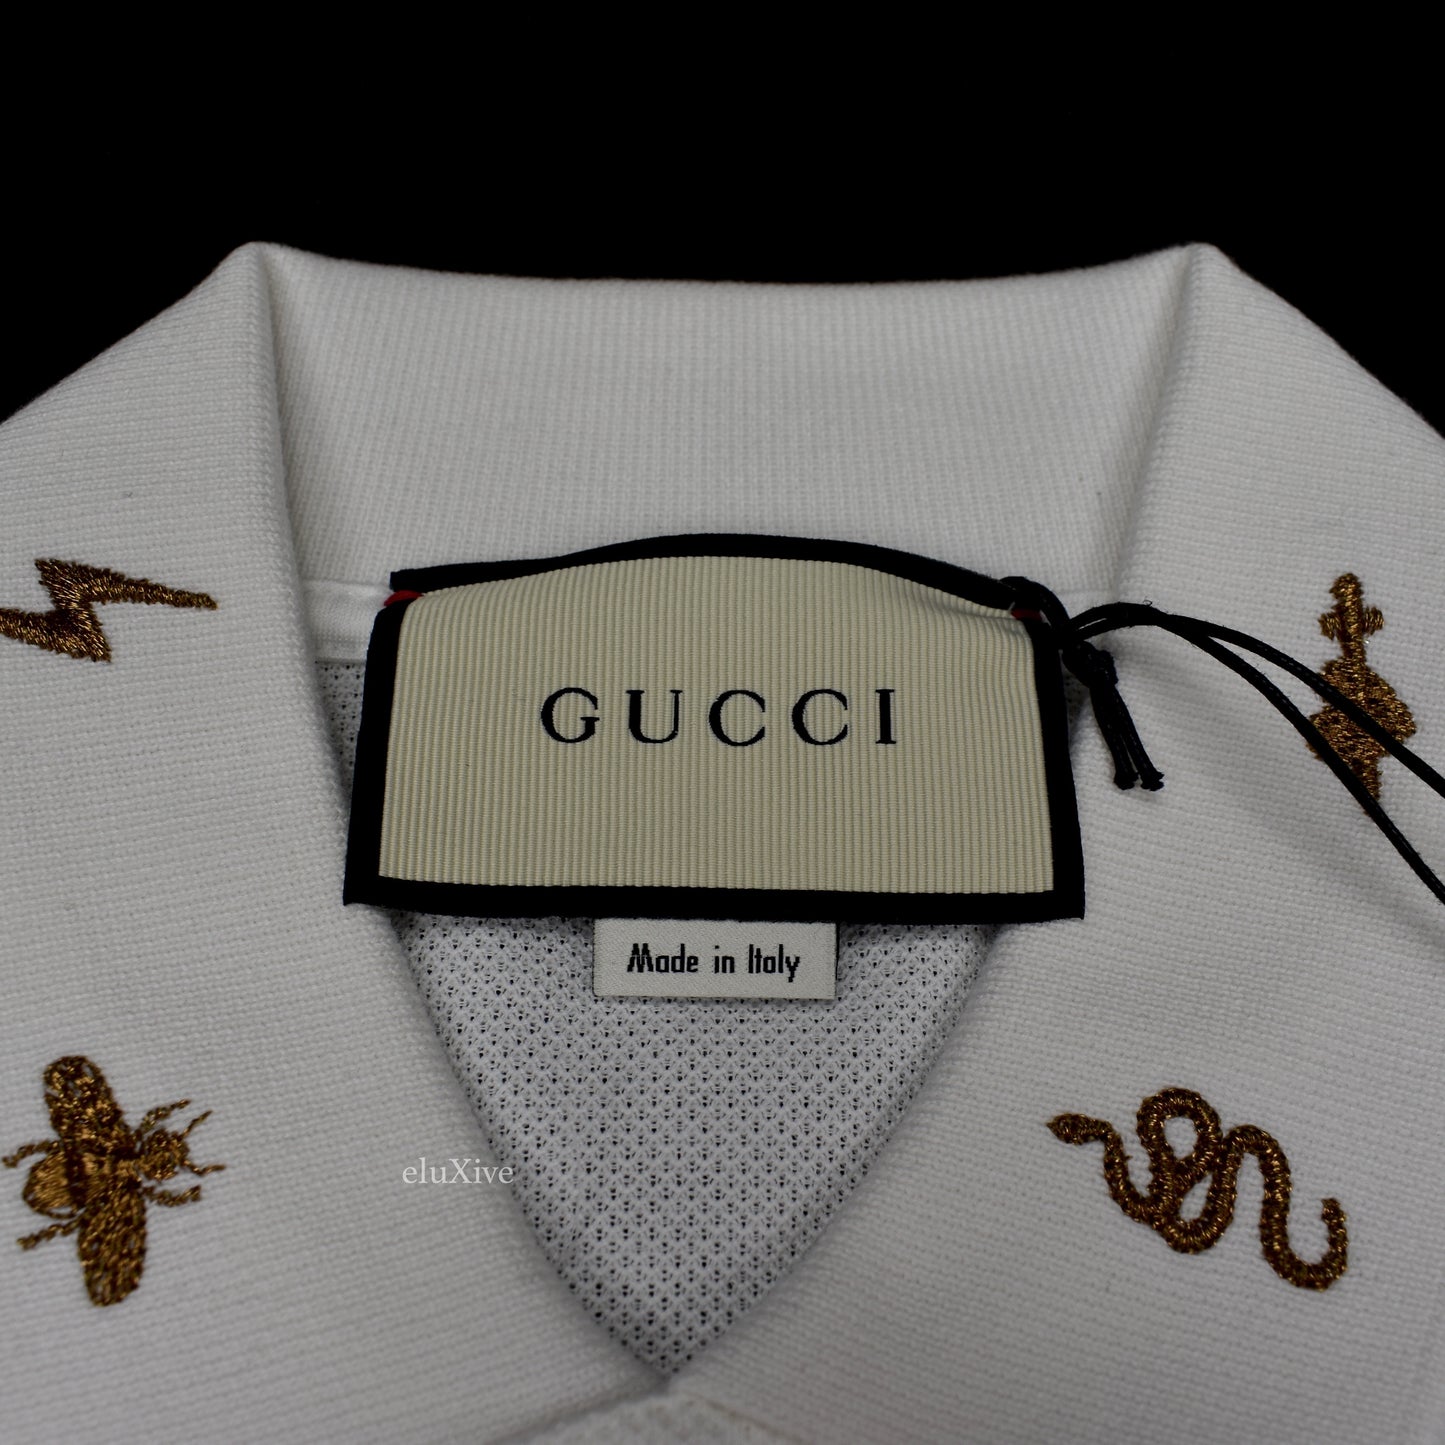 Gucci - Embroidered Collar Polo Shirt (White)